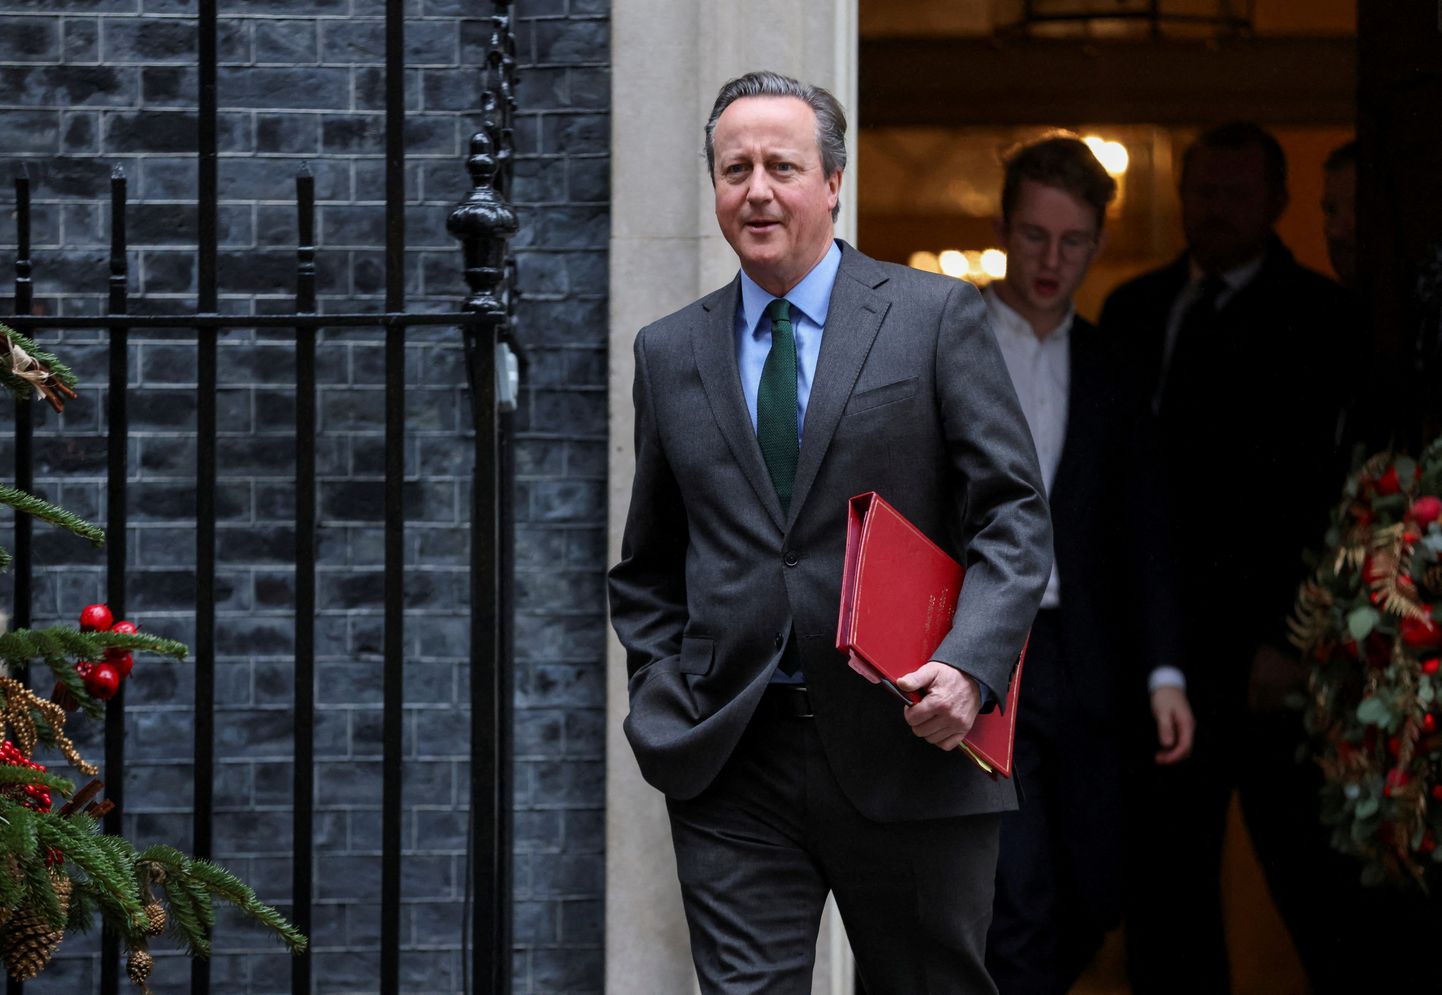 FILE PHOTO: British Foreign Secretary David Cameron leaves Number 10 Downing Street after a Cabinet meeting in London, Britain, December 5, 2023. REUTERS/Hollie Adams/File Photo